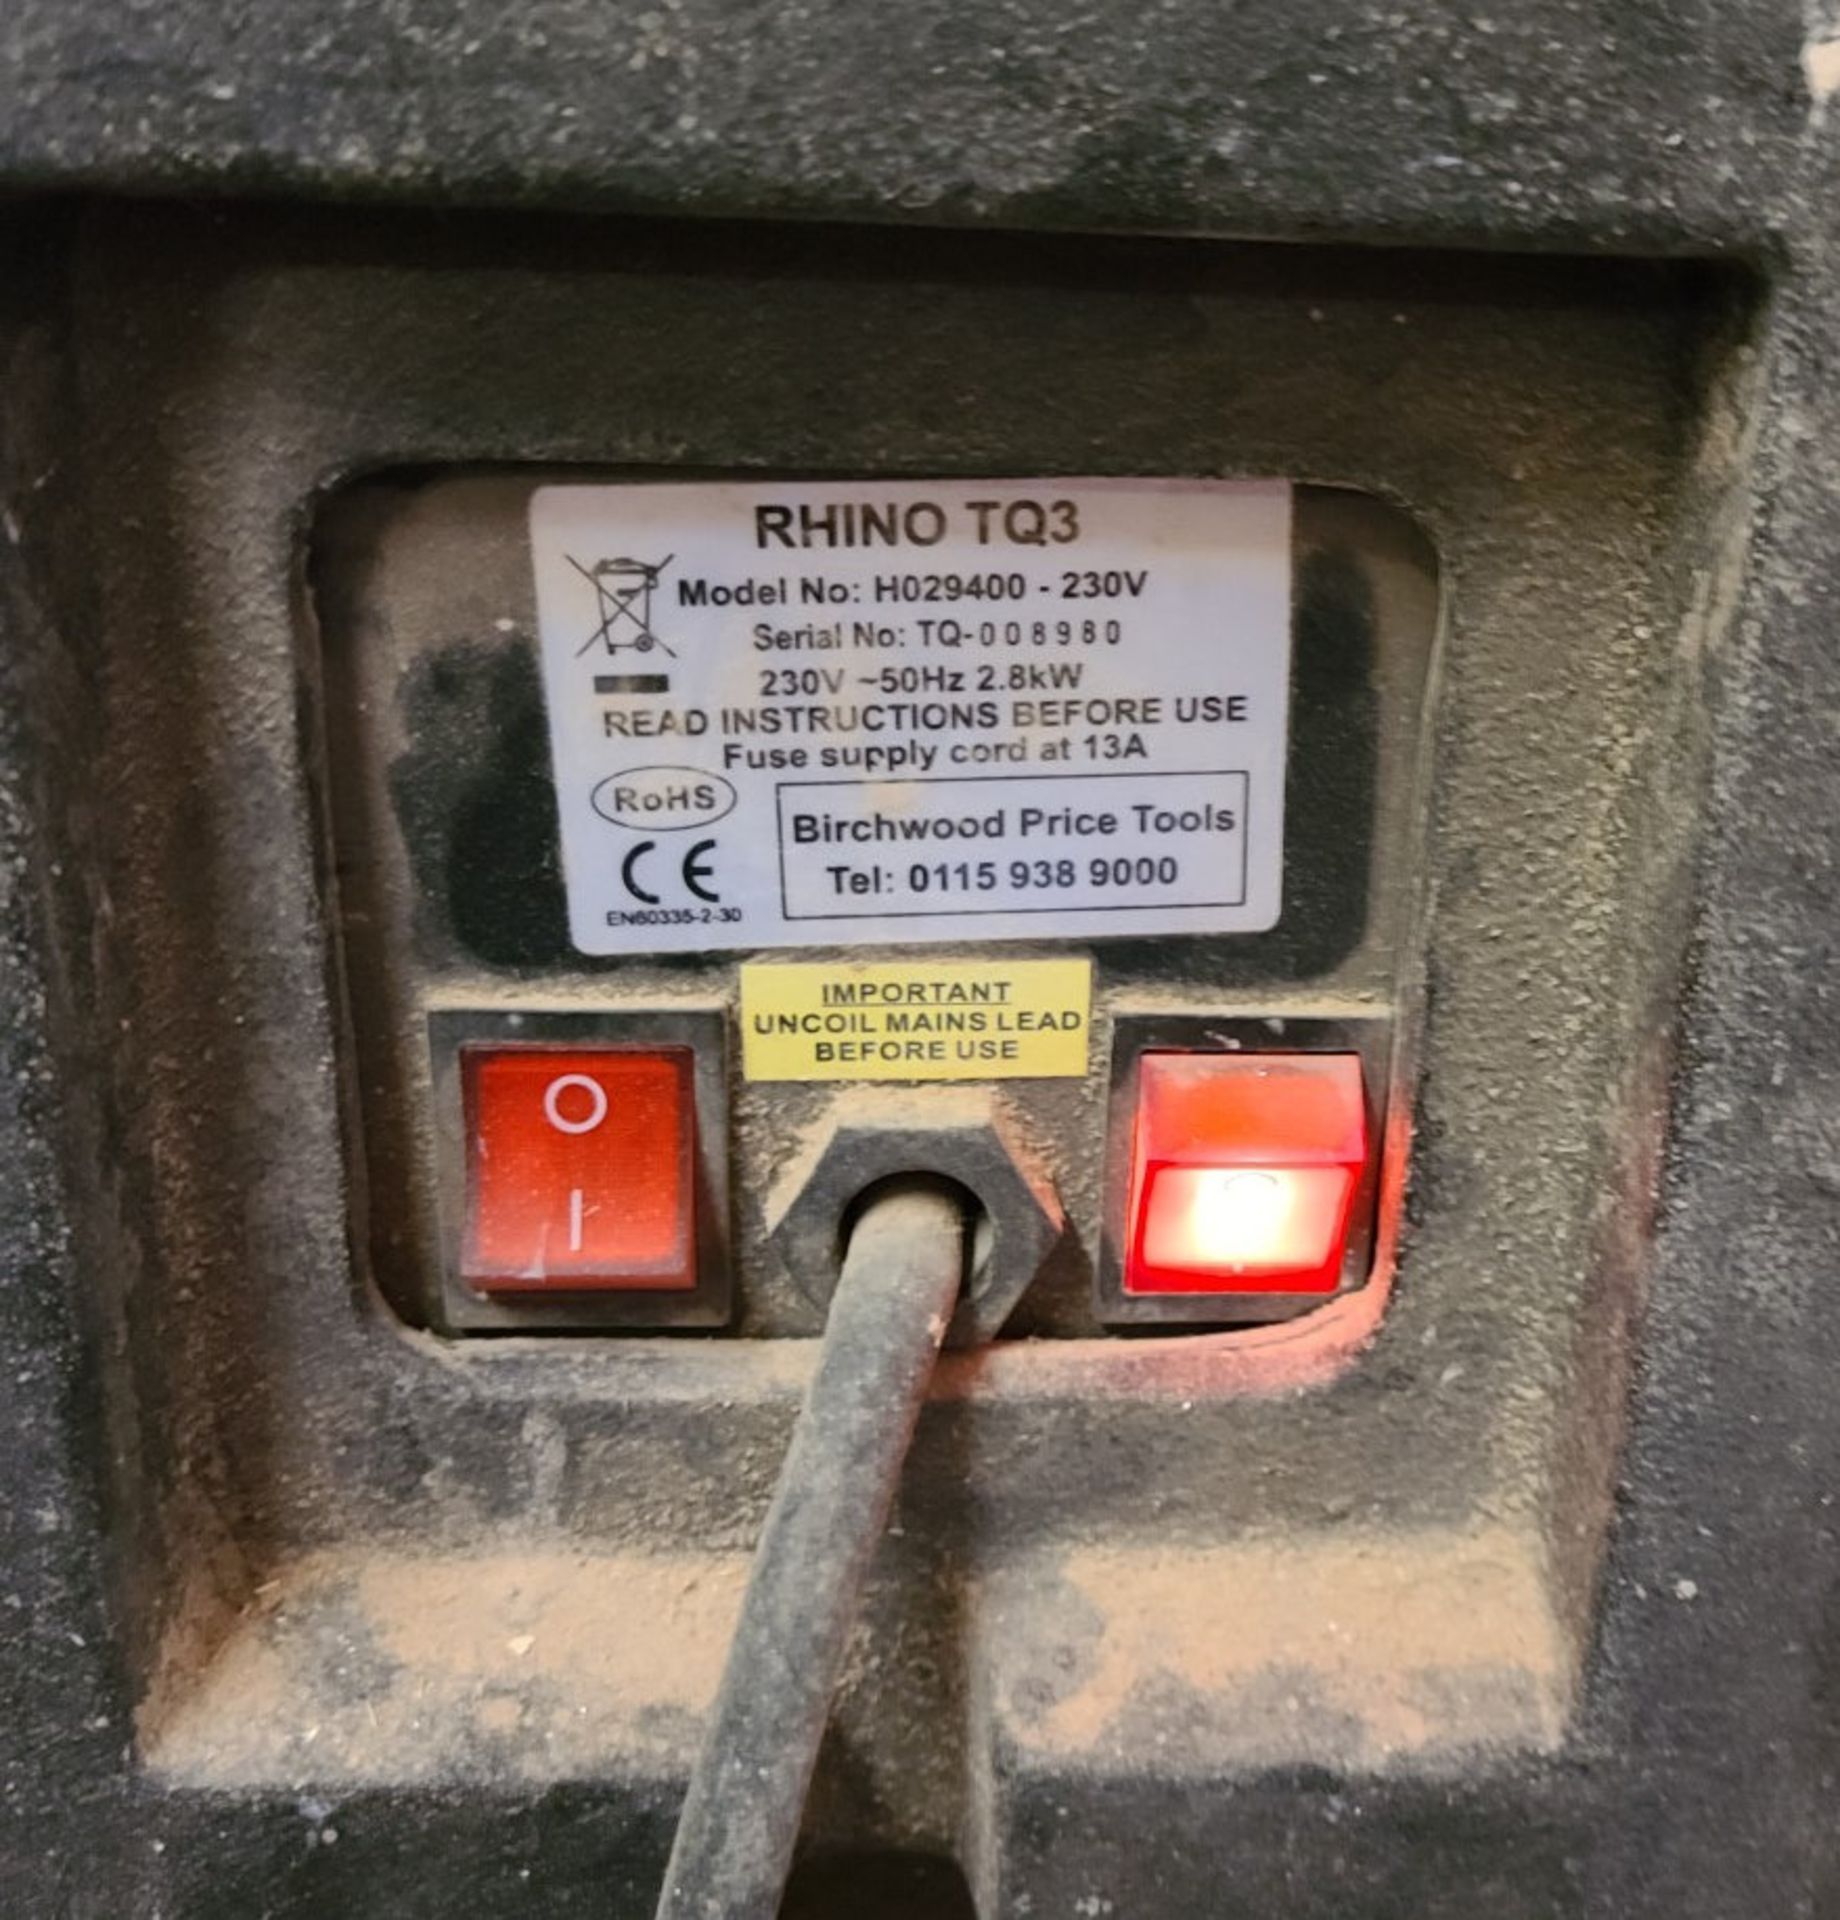 1 x Rhino Tq3 Heater - Ref: - CL846 - Location: Oxford OX2This lot is from a recently closed - Image 4 of 6